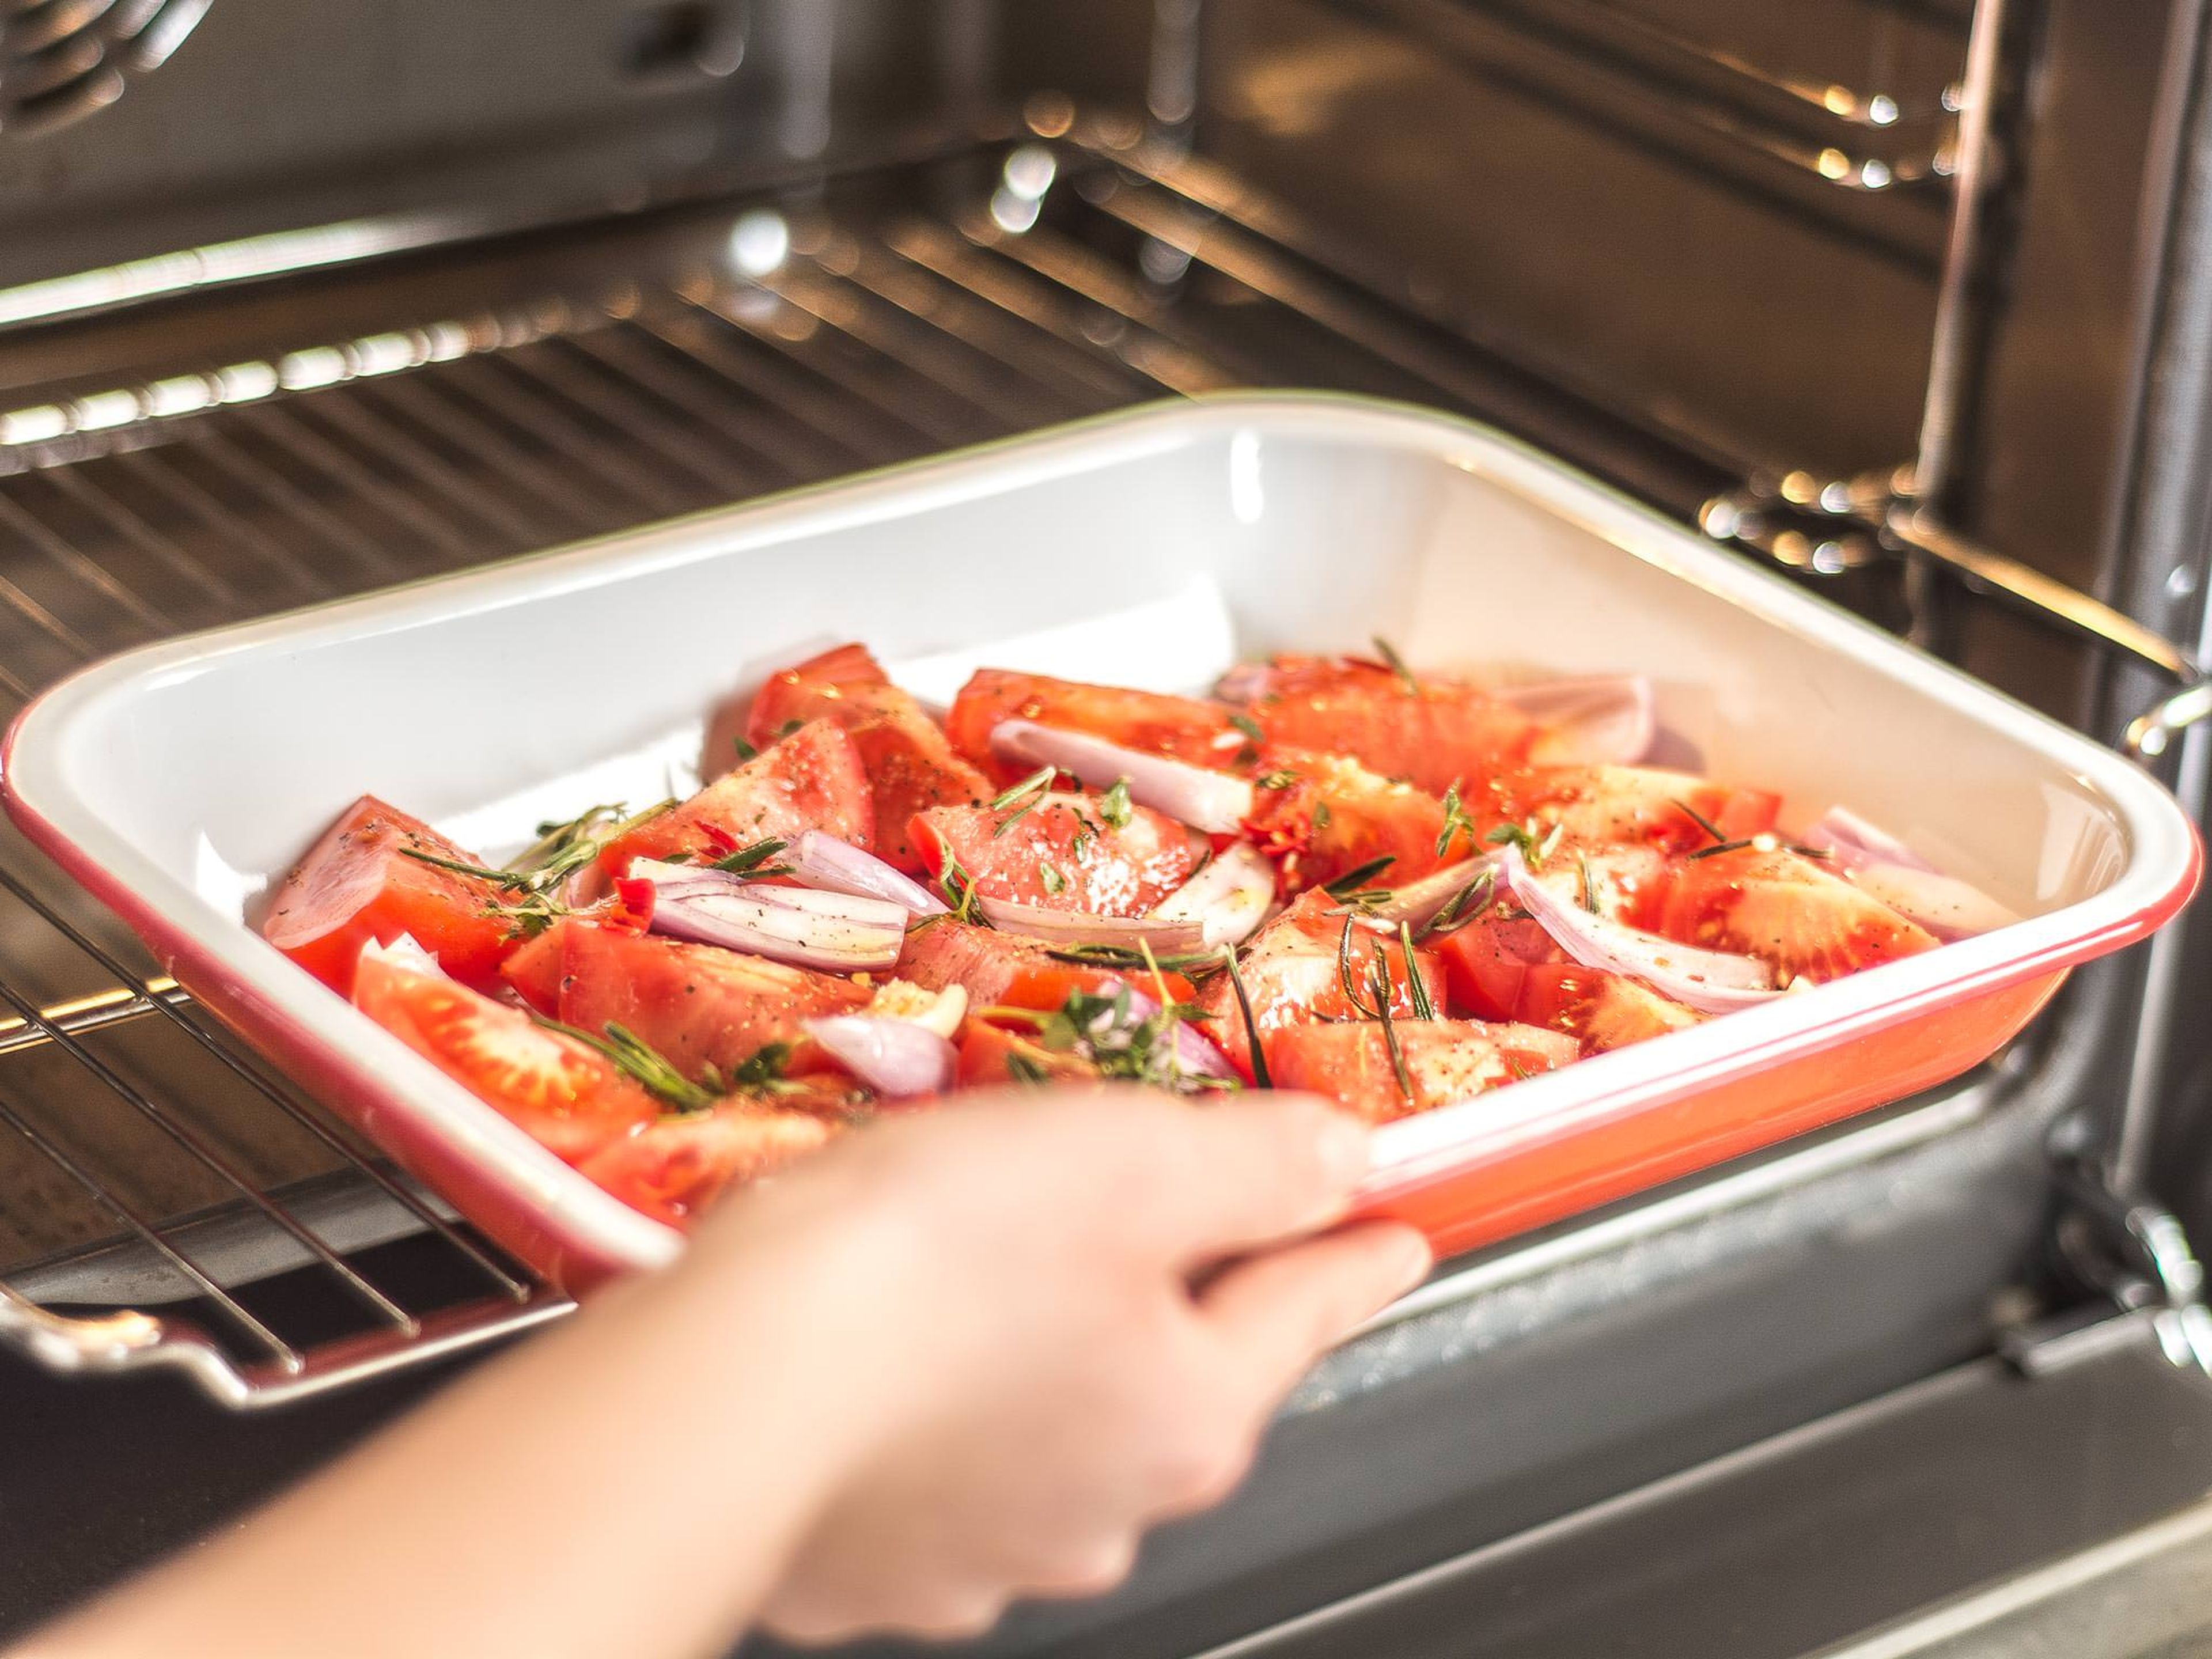 Place the shallots, garlic, tomatoes, thyme, rosemary, and chili into a baking dish. Season with olive oil, sugar, salt, and pepper and mix well. Roast in a preheated oven at 200°C/400°F for approx. 20 – 25  min.